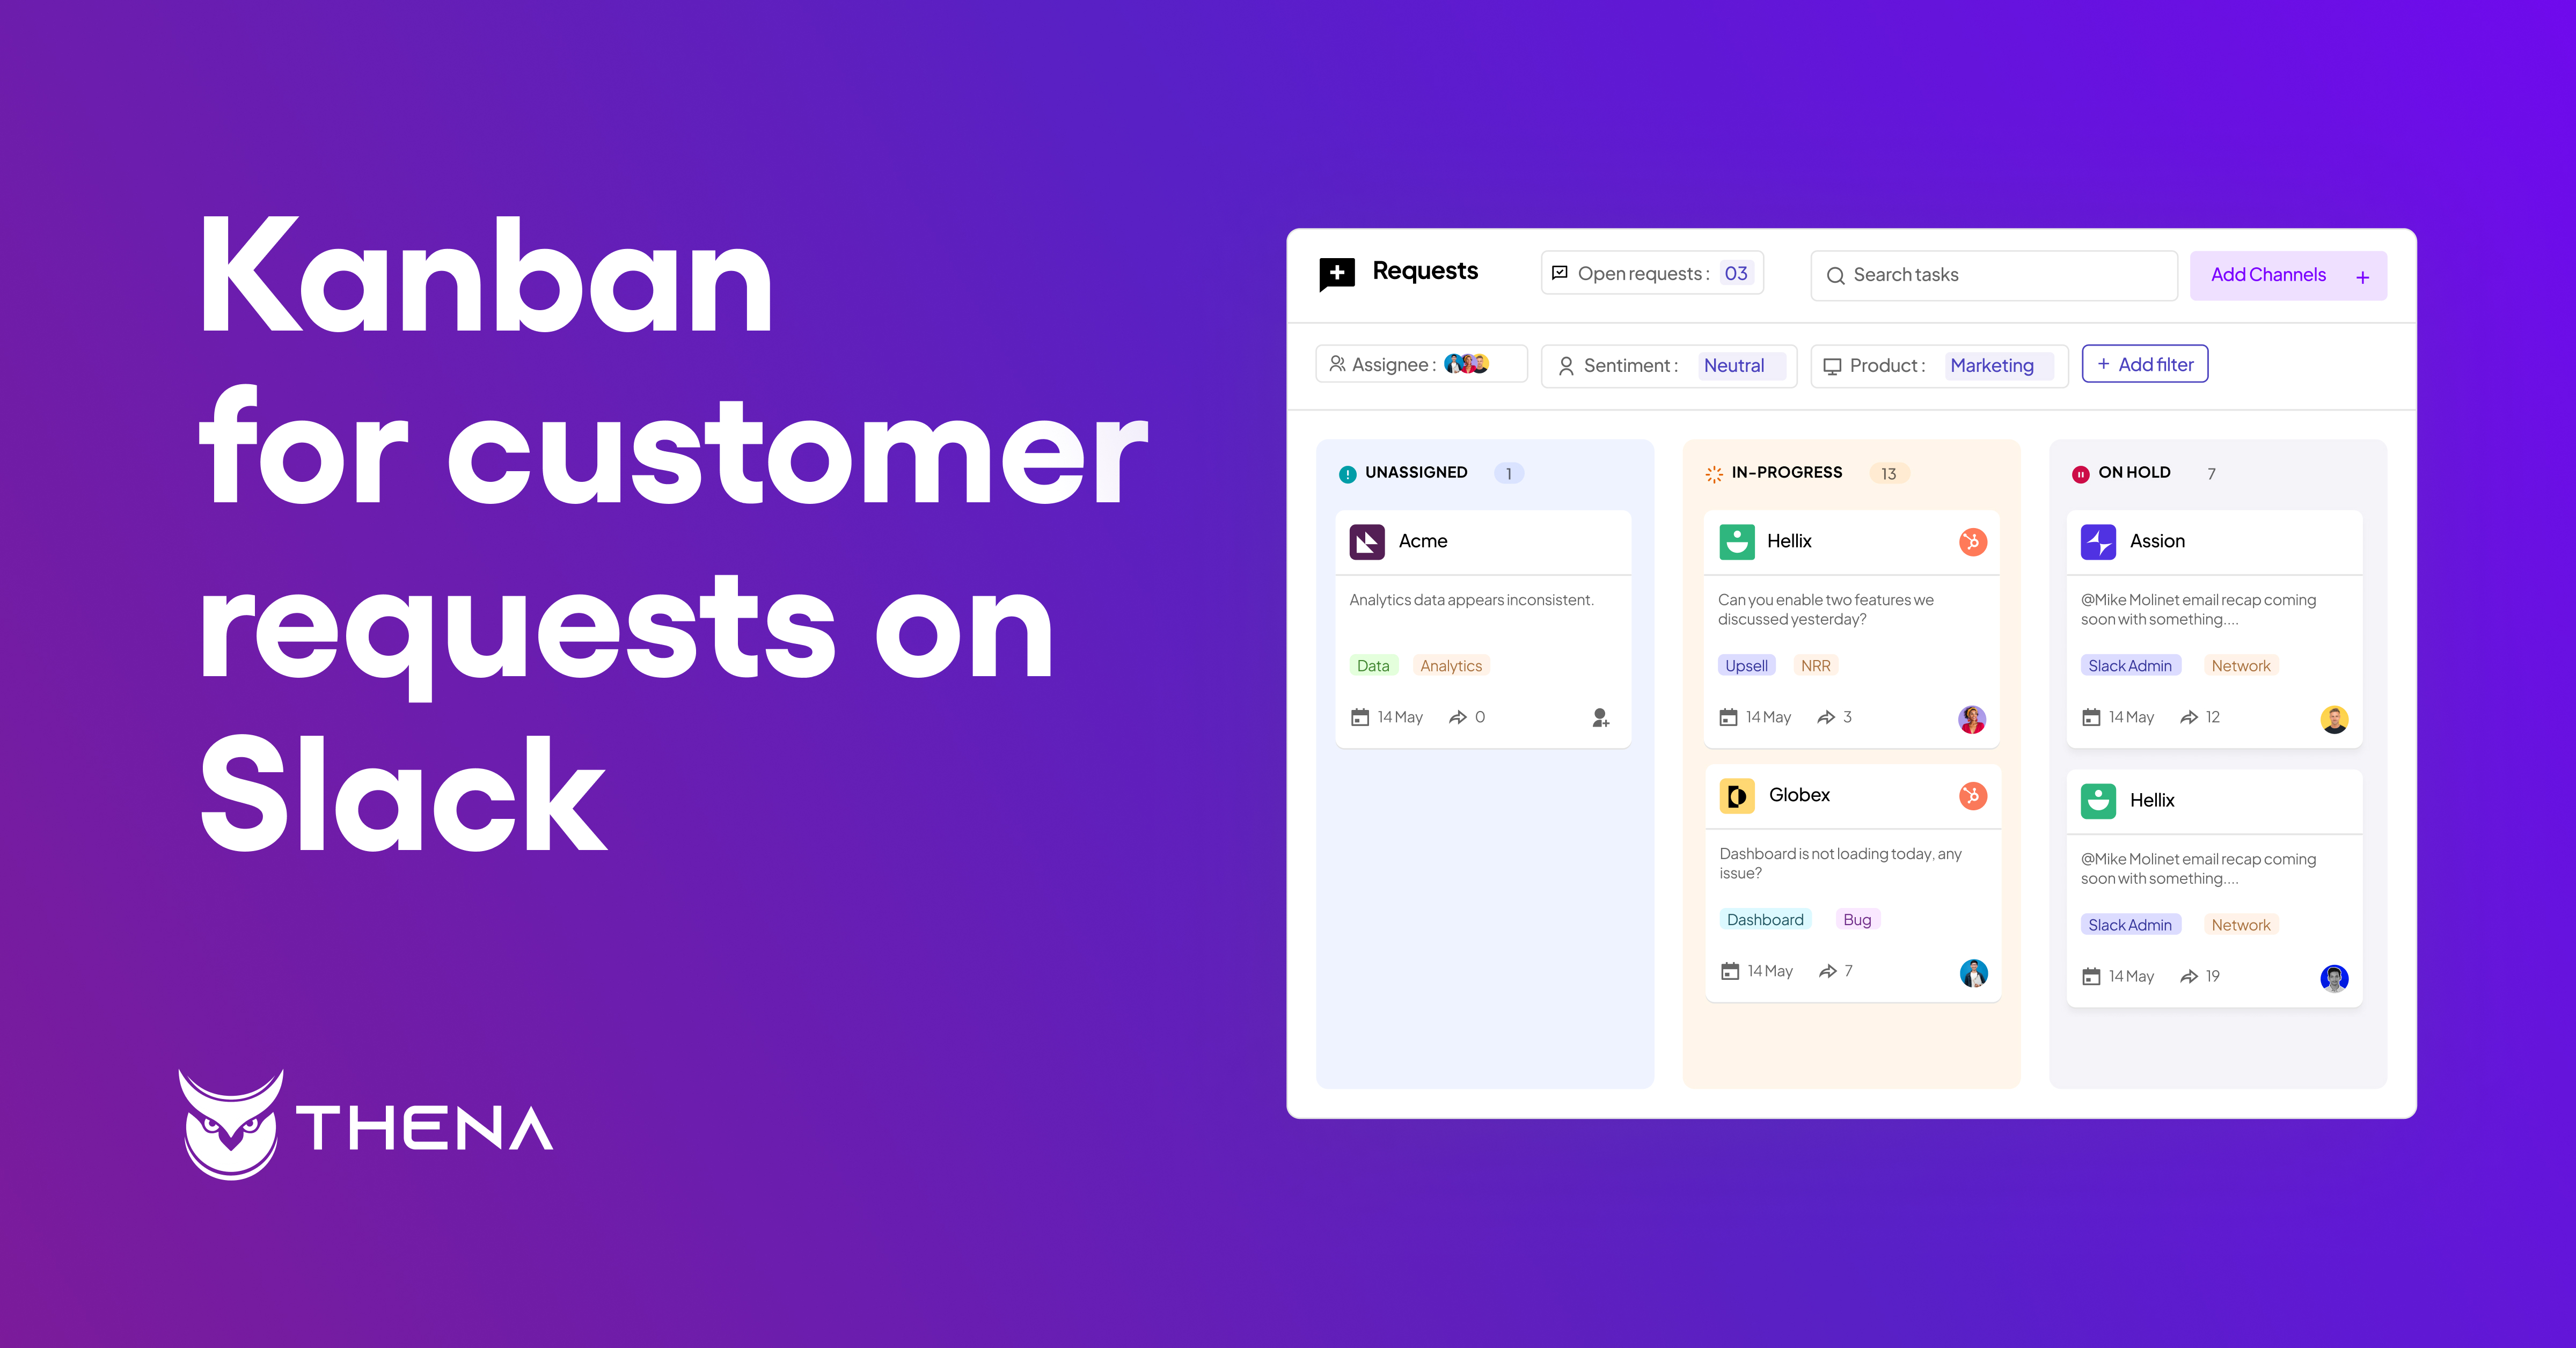 Manage all customer requests raised on Slack from a Kanban board